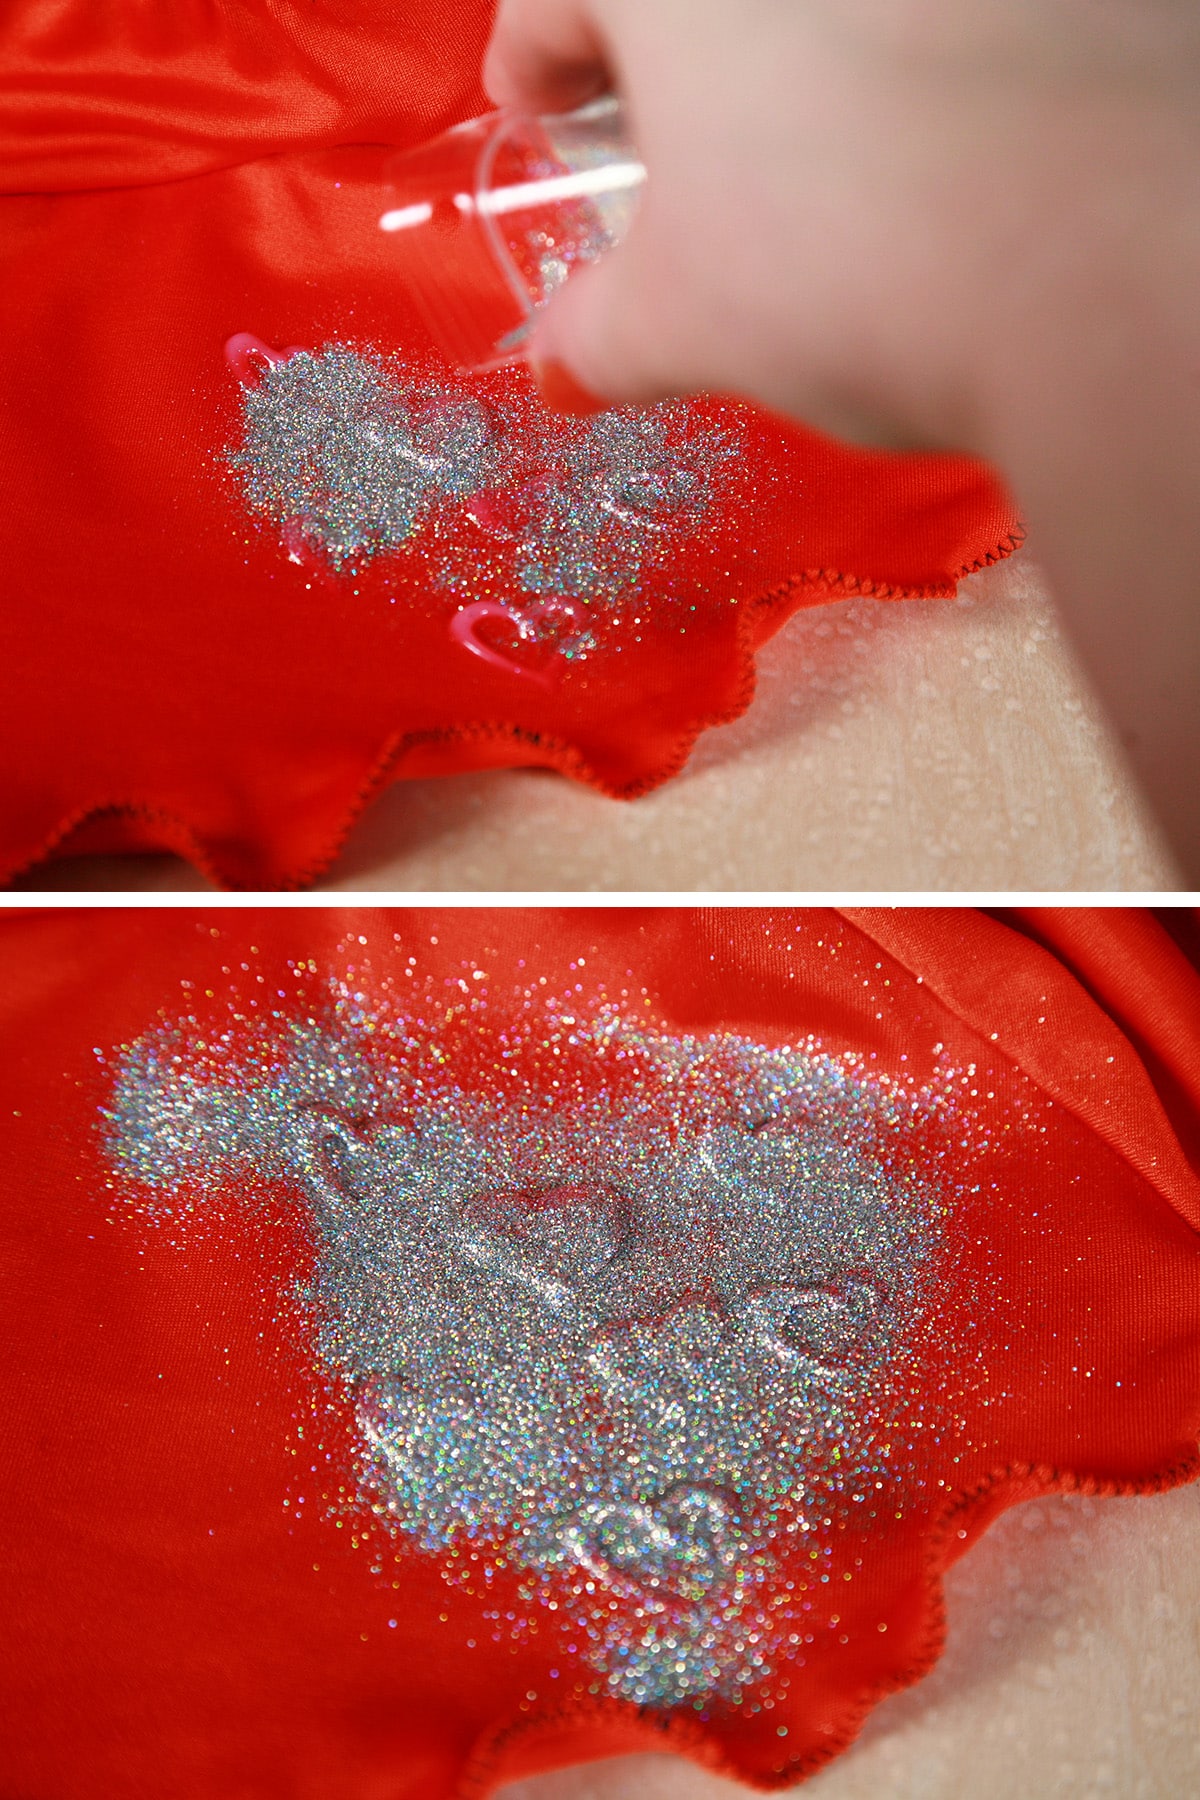 A two part image showing silver holographic glitter being applied to an orange skating skirt.